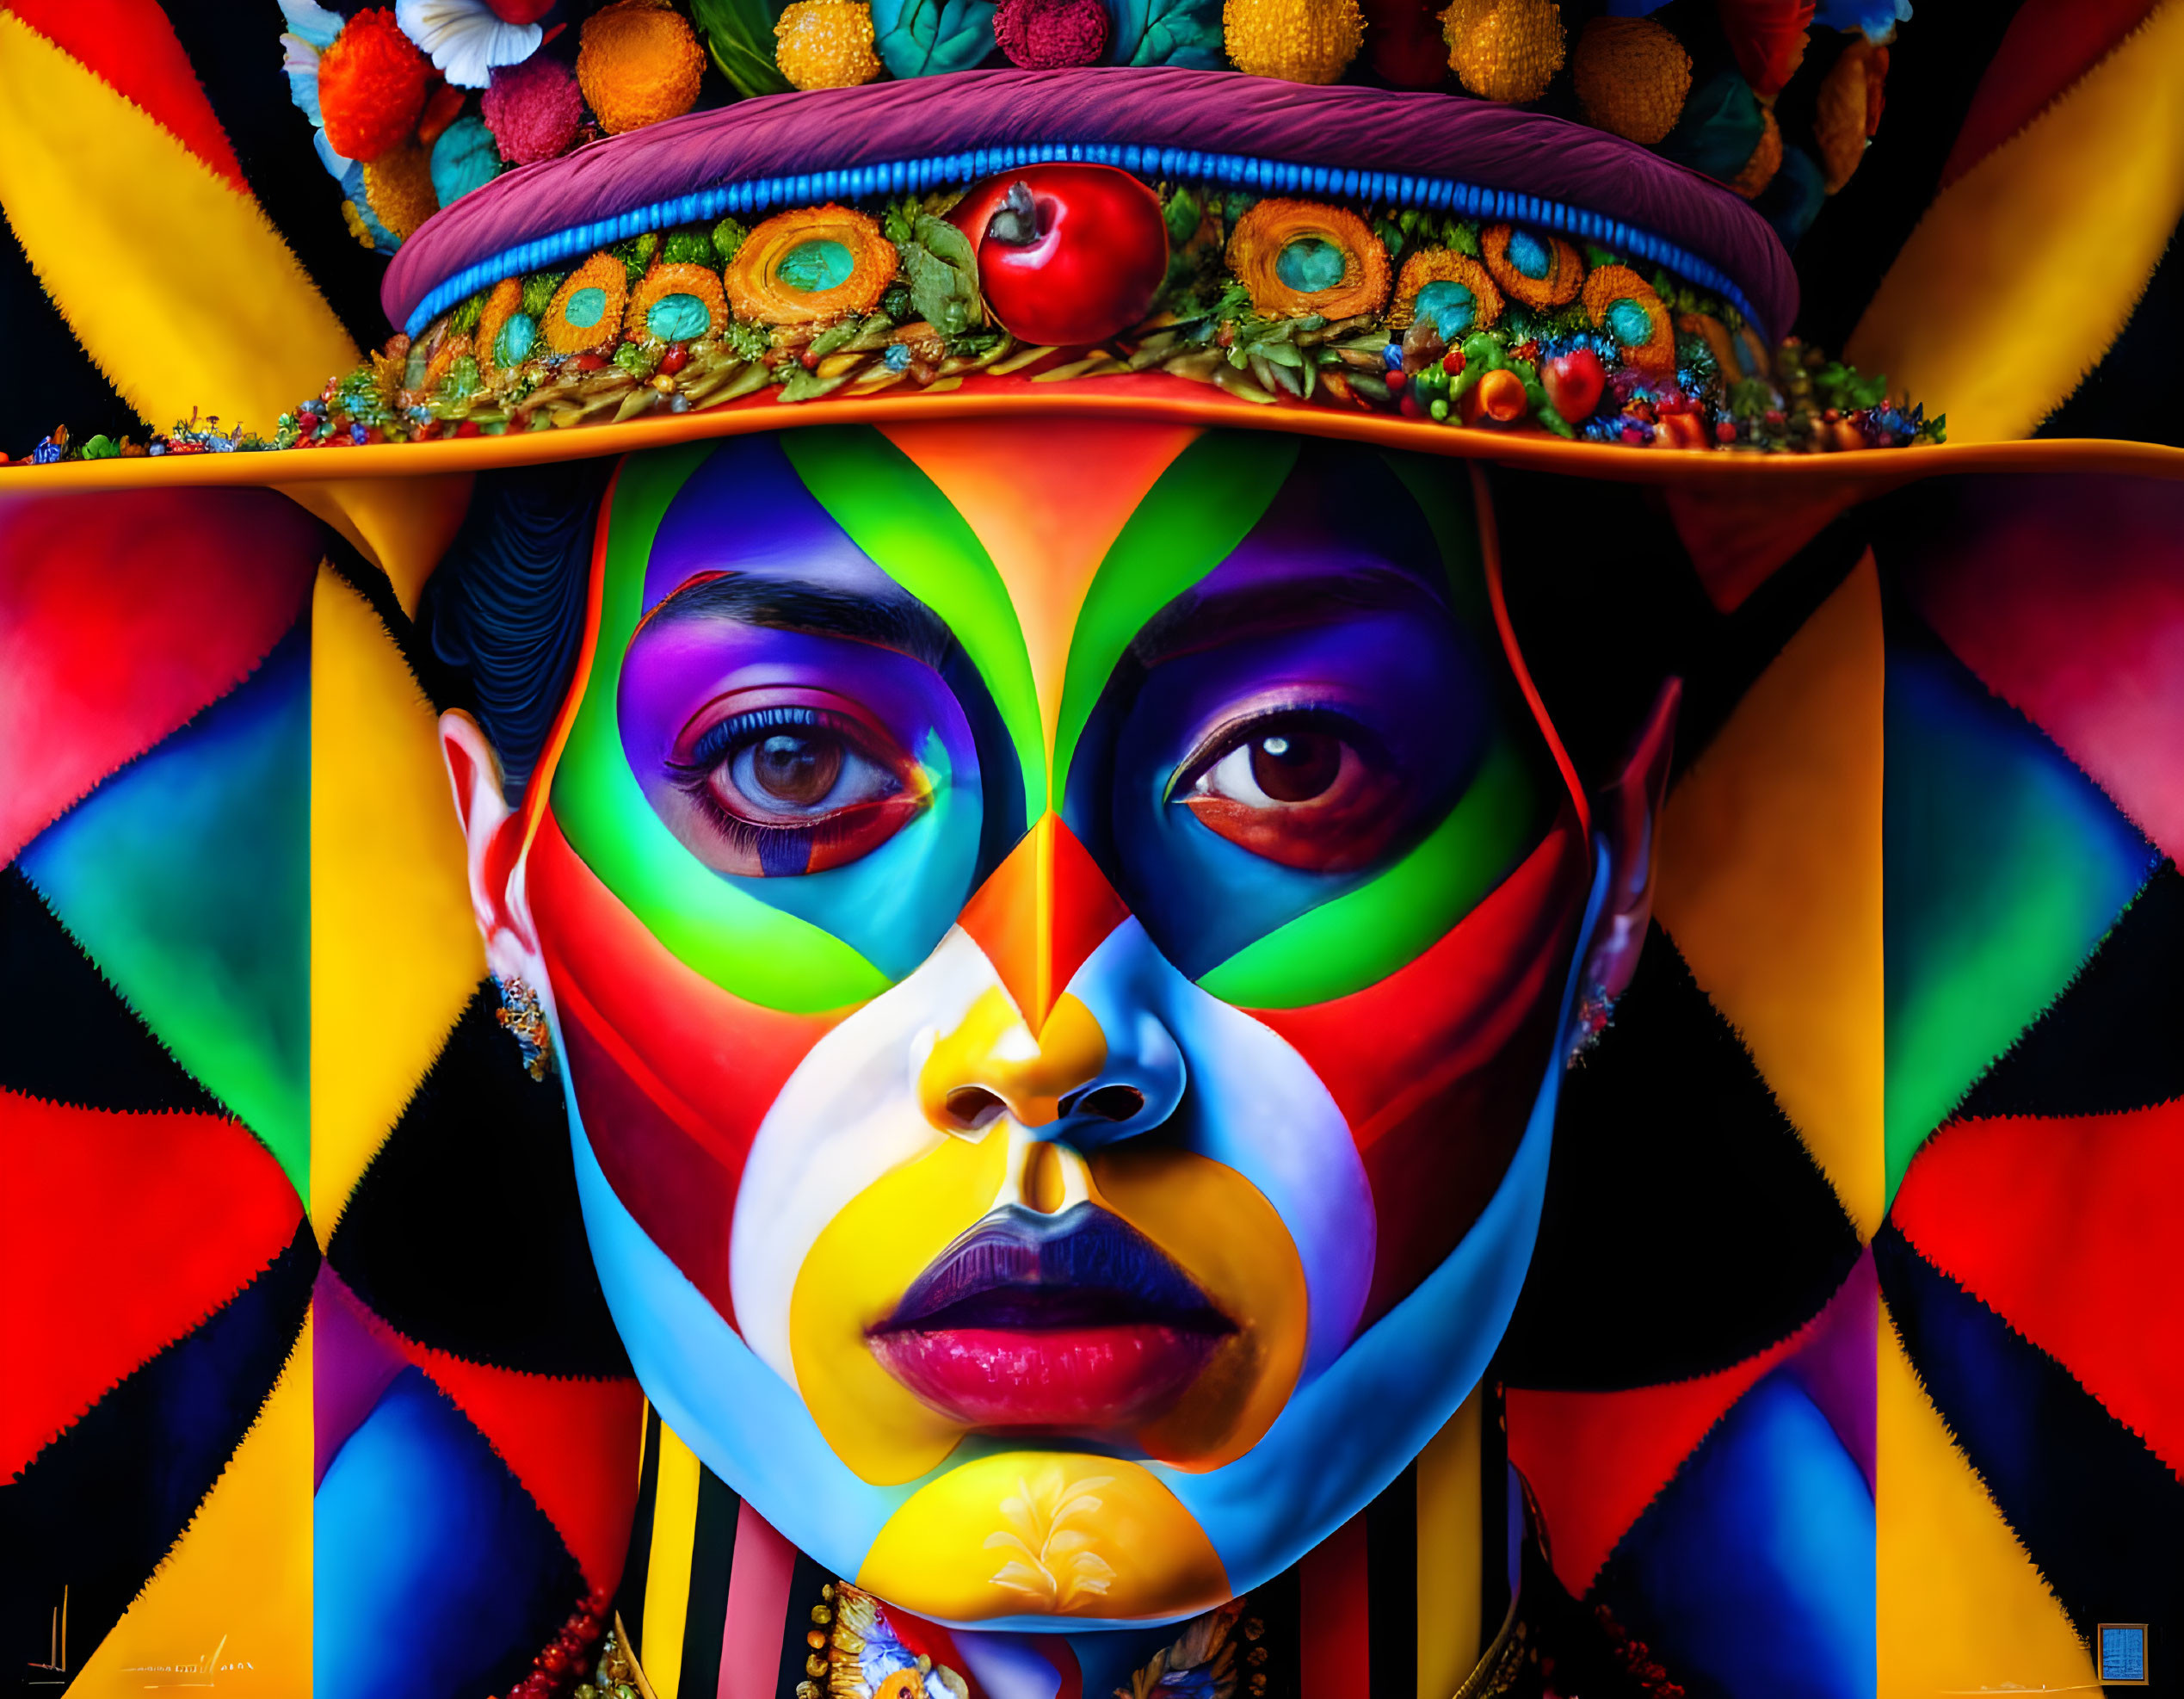 Colorful close-up portrait of person with painted face and fruit hat